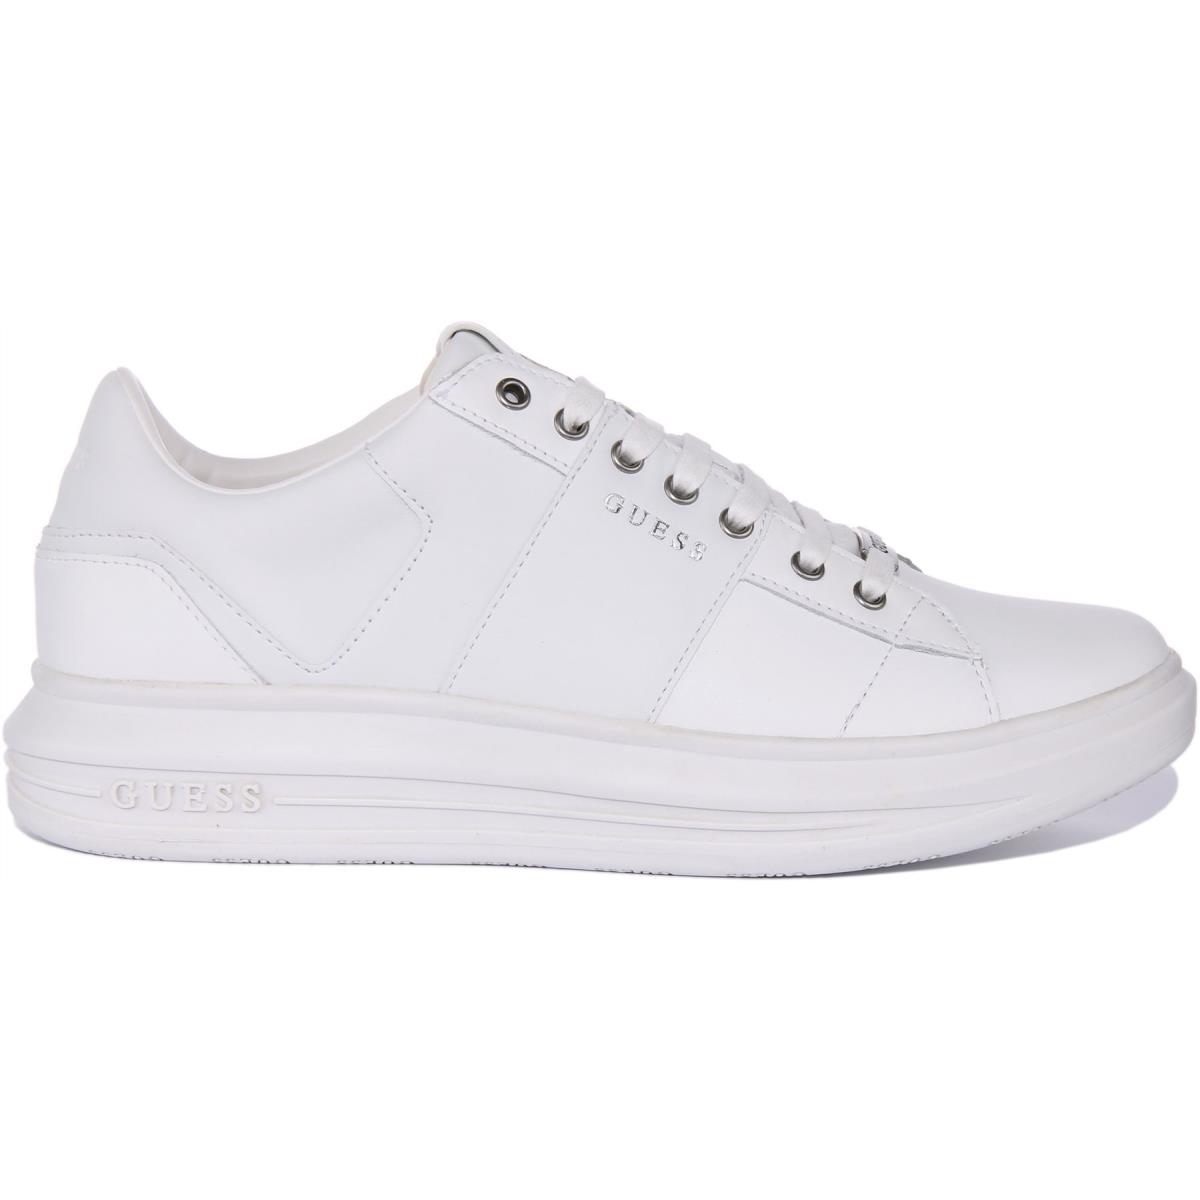 Guess Fm5Vbslea12 Vivo Salerno Mens Low Top Sneakers In White Size US 7 - 13